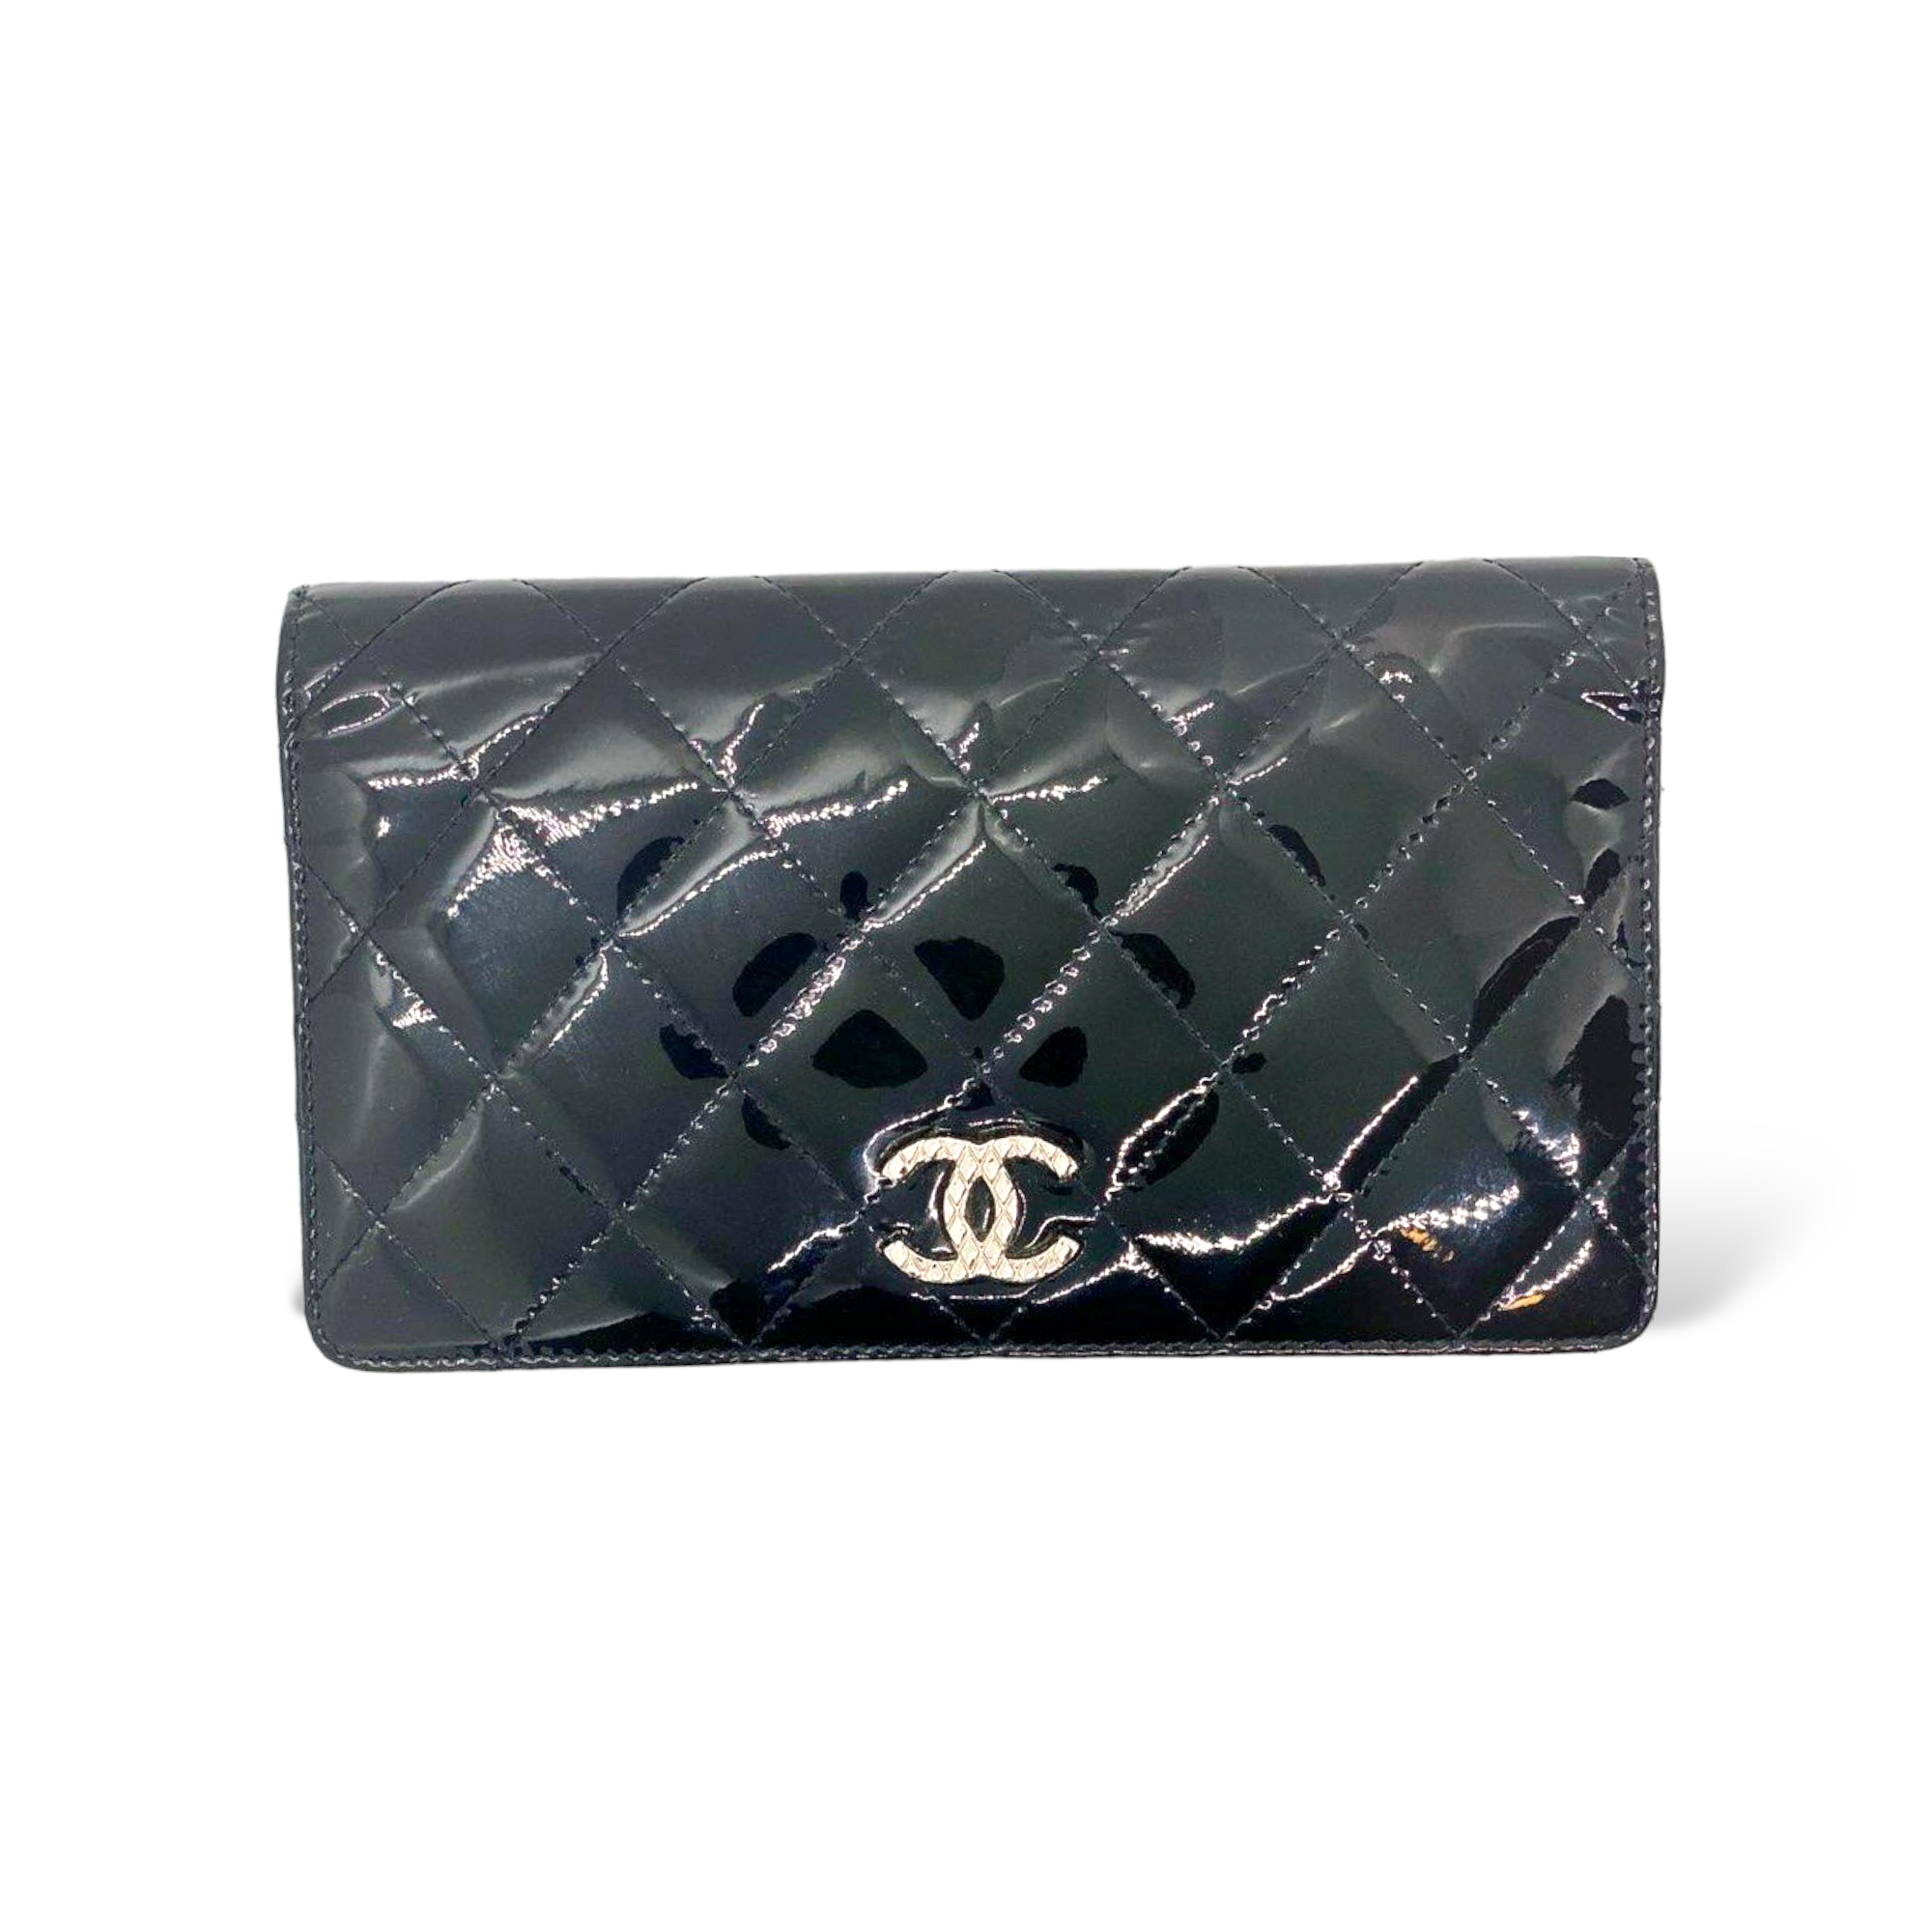 leather chanel wallet authentic